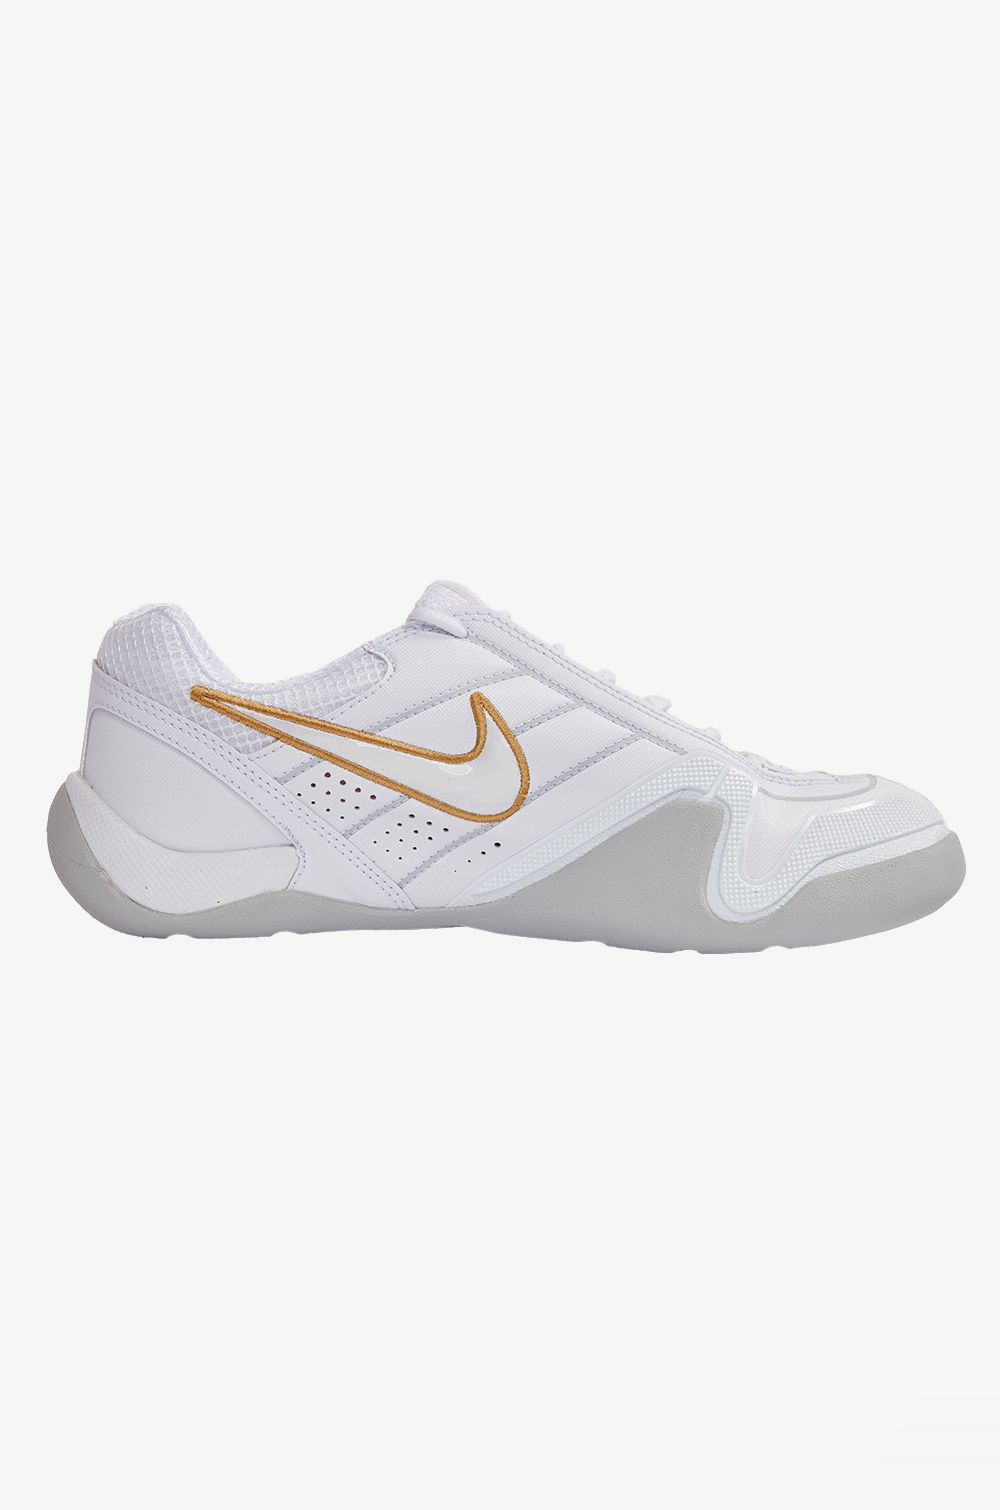 Nike Shoes Air Zoom Fencer Gold